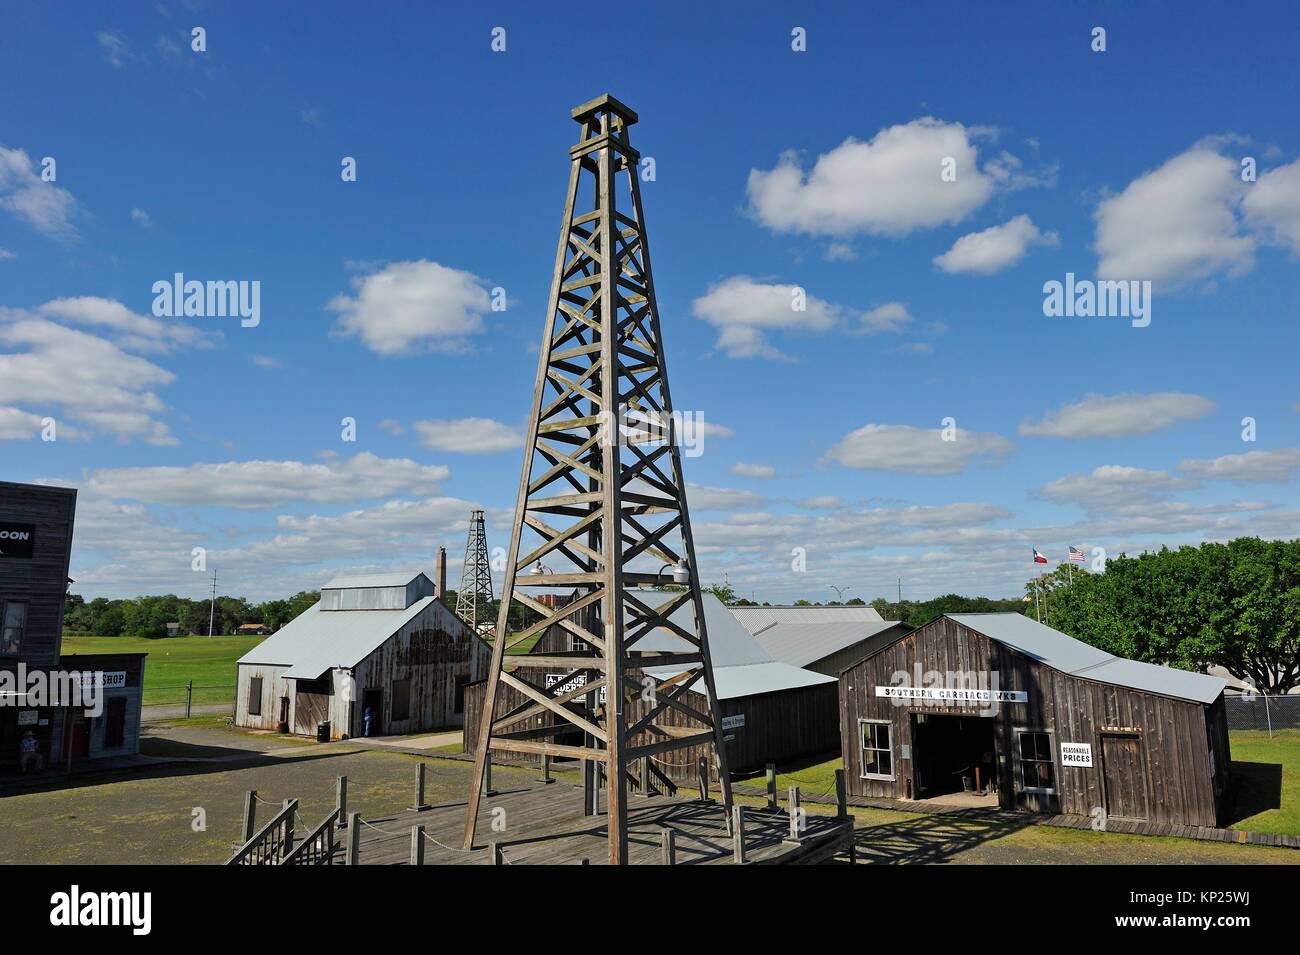 The Spindletop-Gladys City Boomtown Museum that features an oil derrick and many reconstructed Gladys City building interiors furnished with Stock Photo